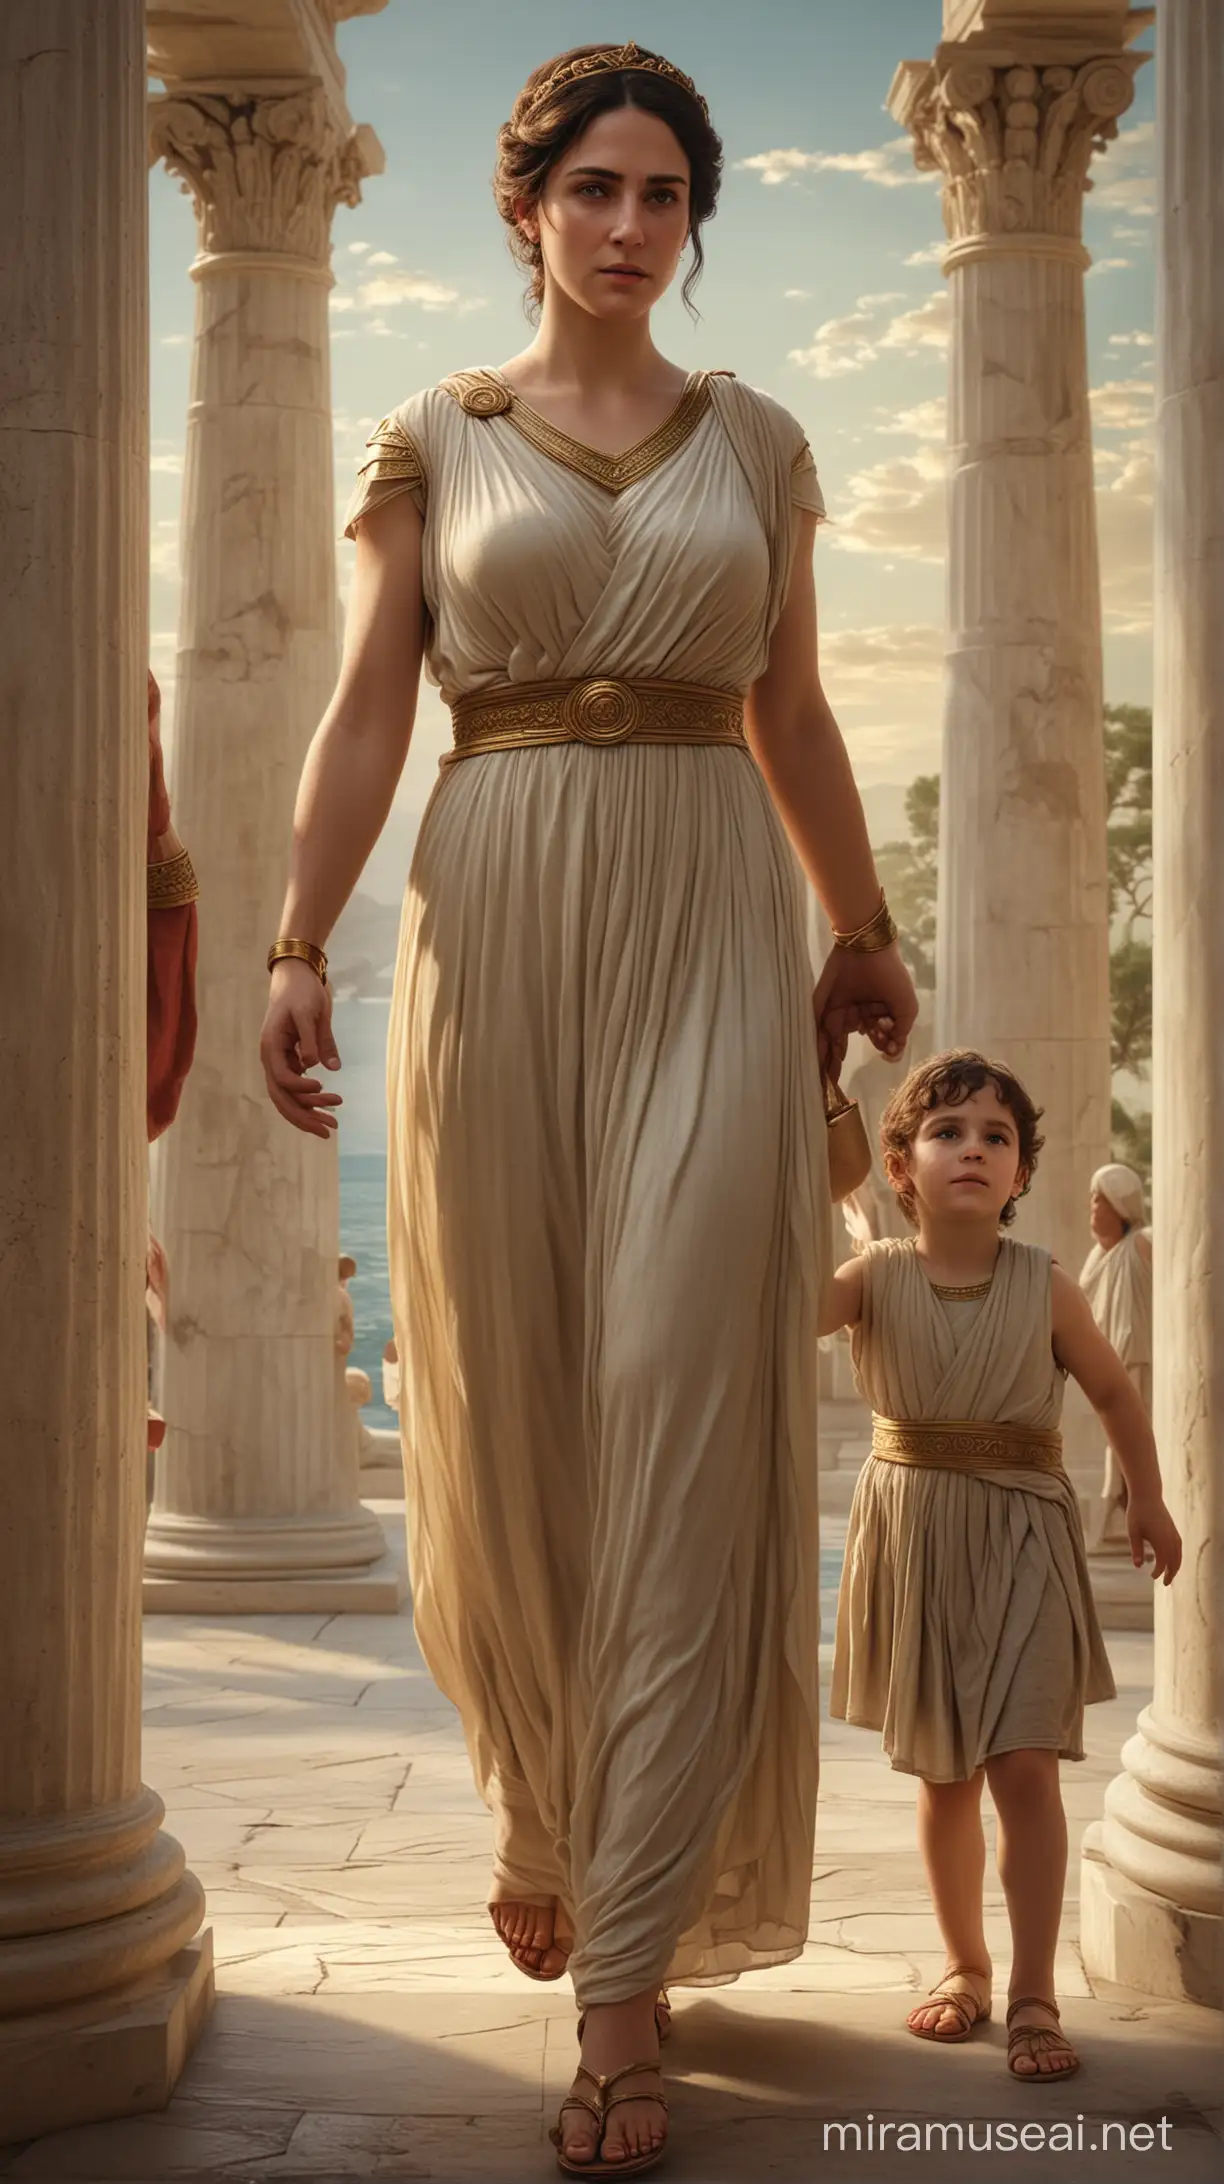 Imagery portraying Olympias, Alexander's mother, influencing him as a child, highlighting her significance in shaping his beliefs and ambitions. hyerrealistic